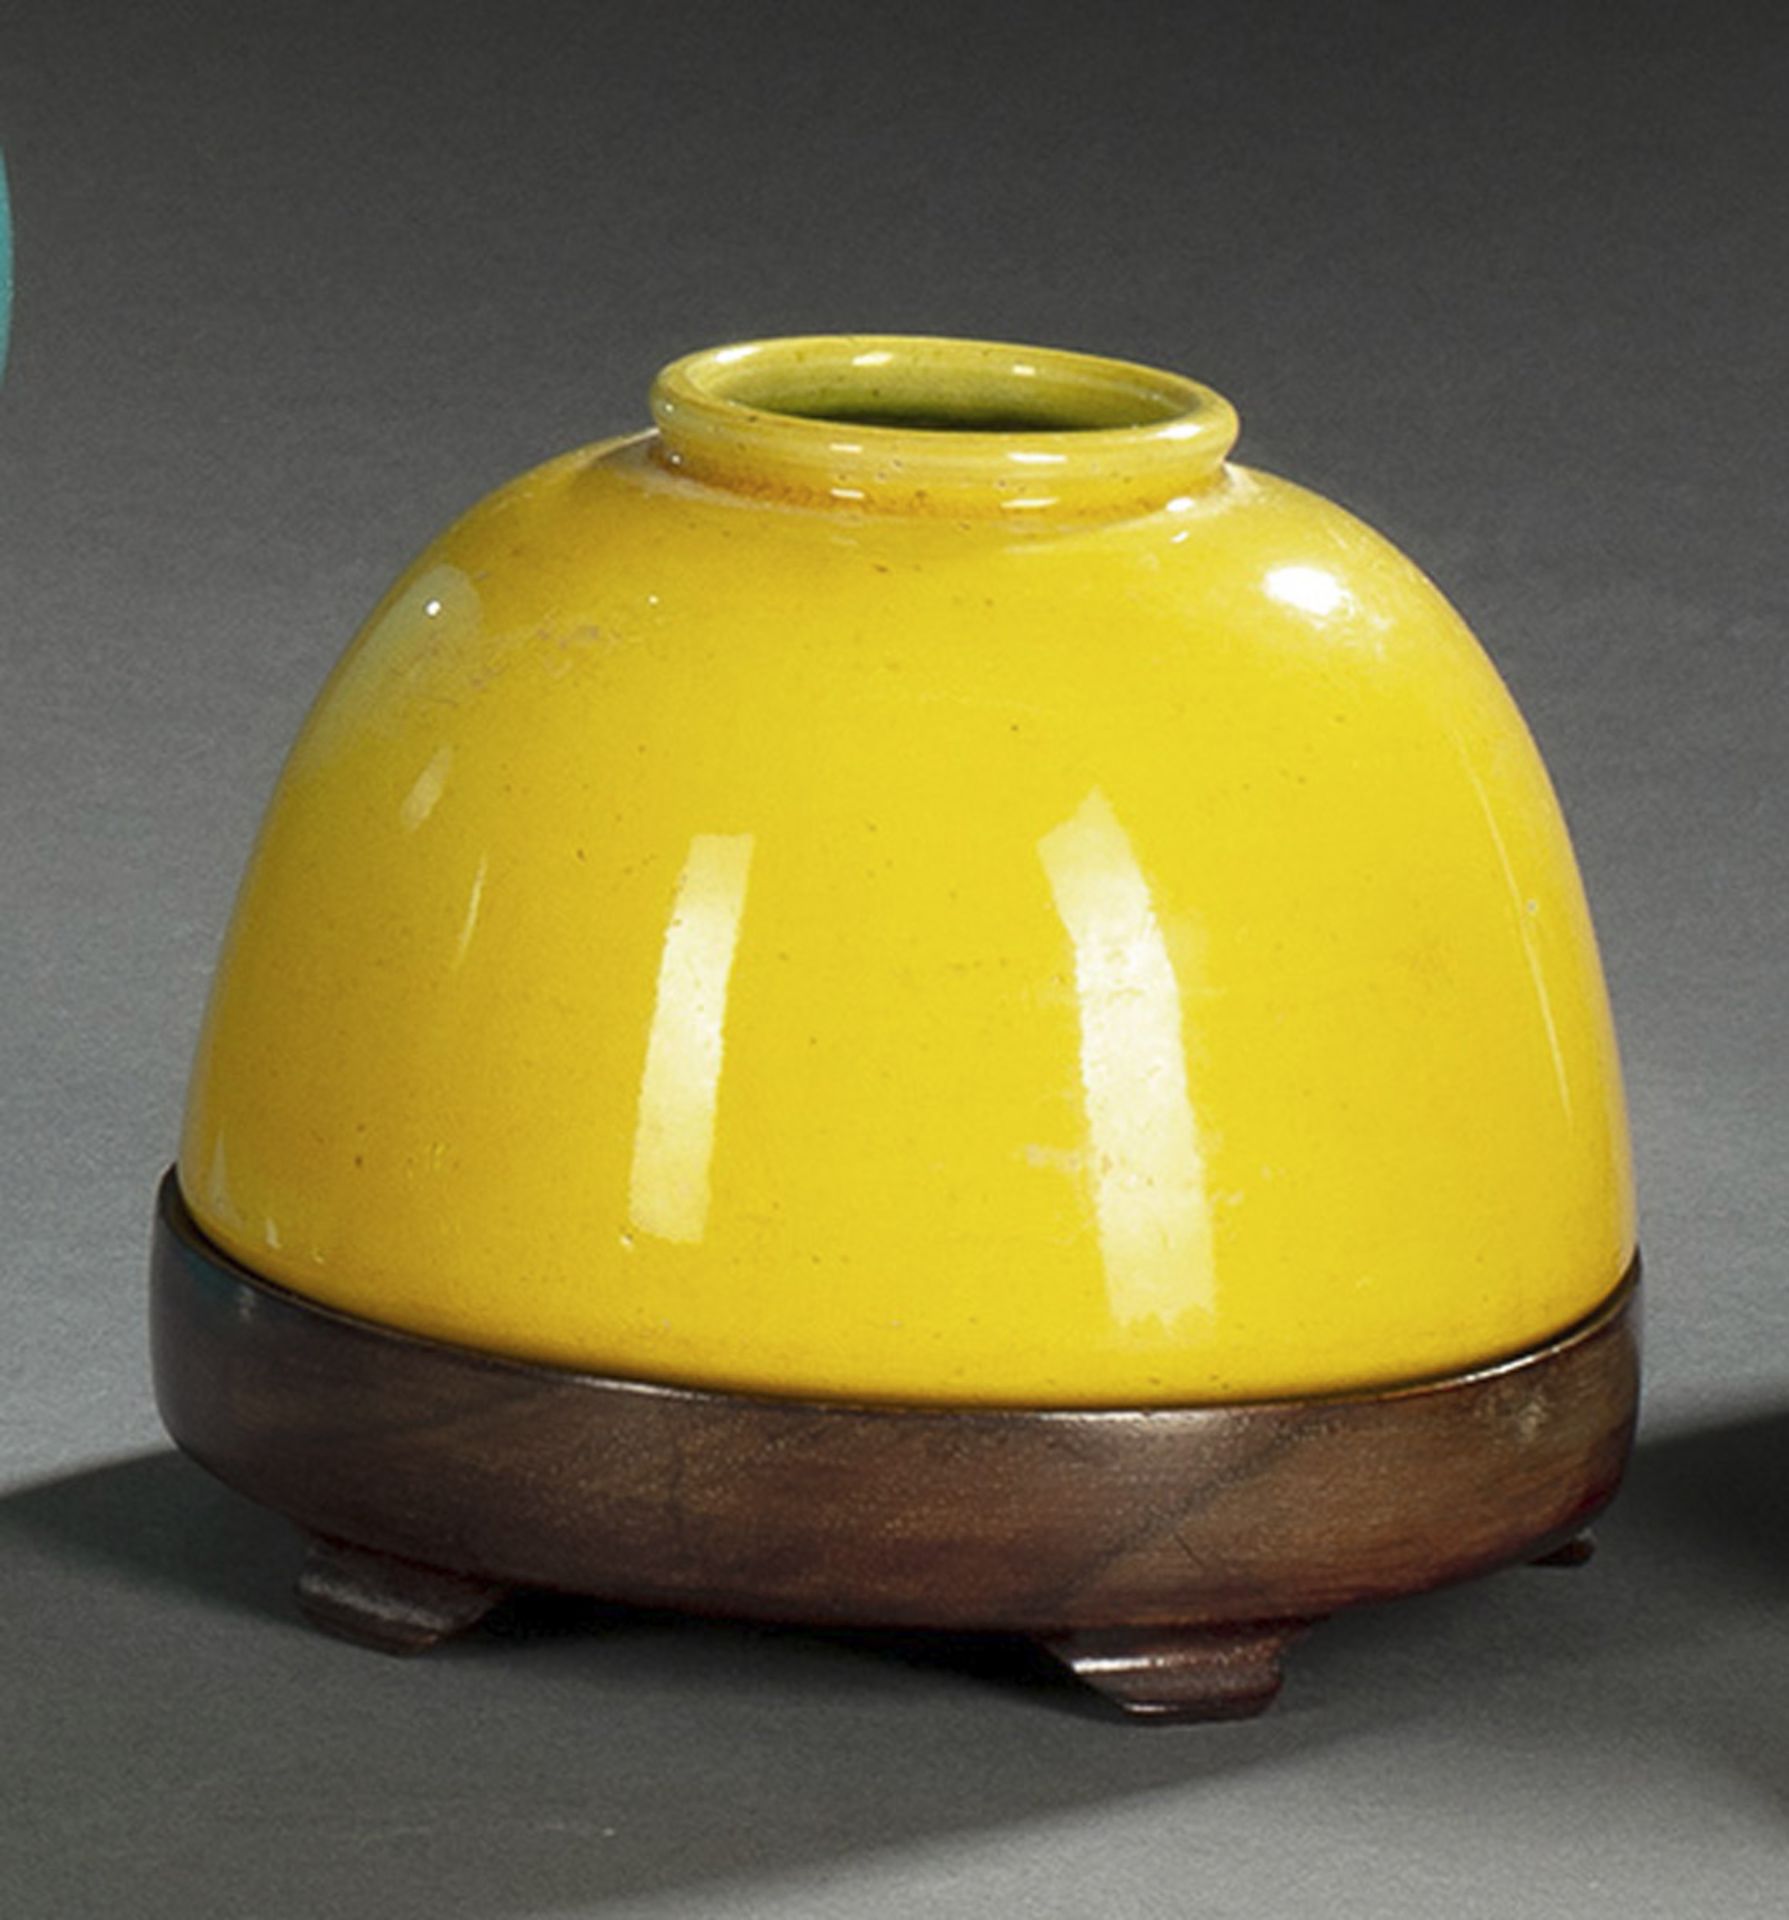 A YELLOW-GLAZED BISCUIT PORCELAIN BRUSHWASHER ON A WOOD STAND